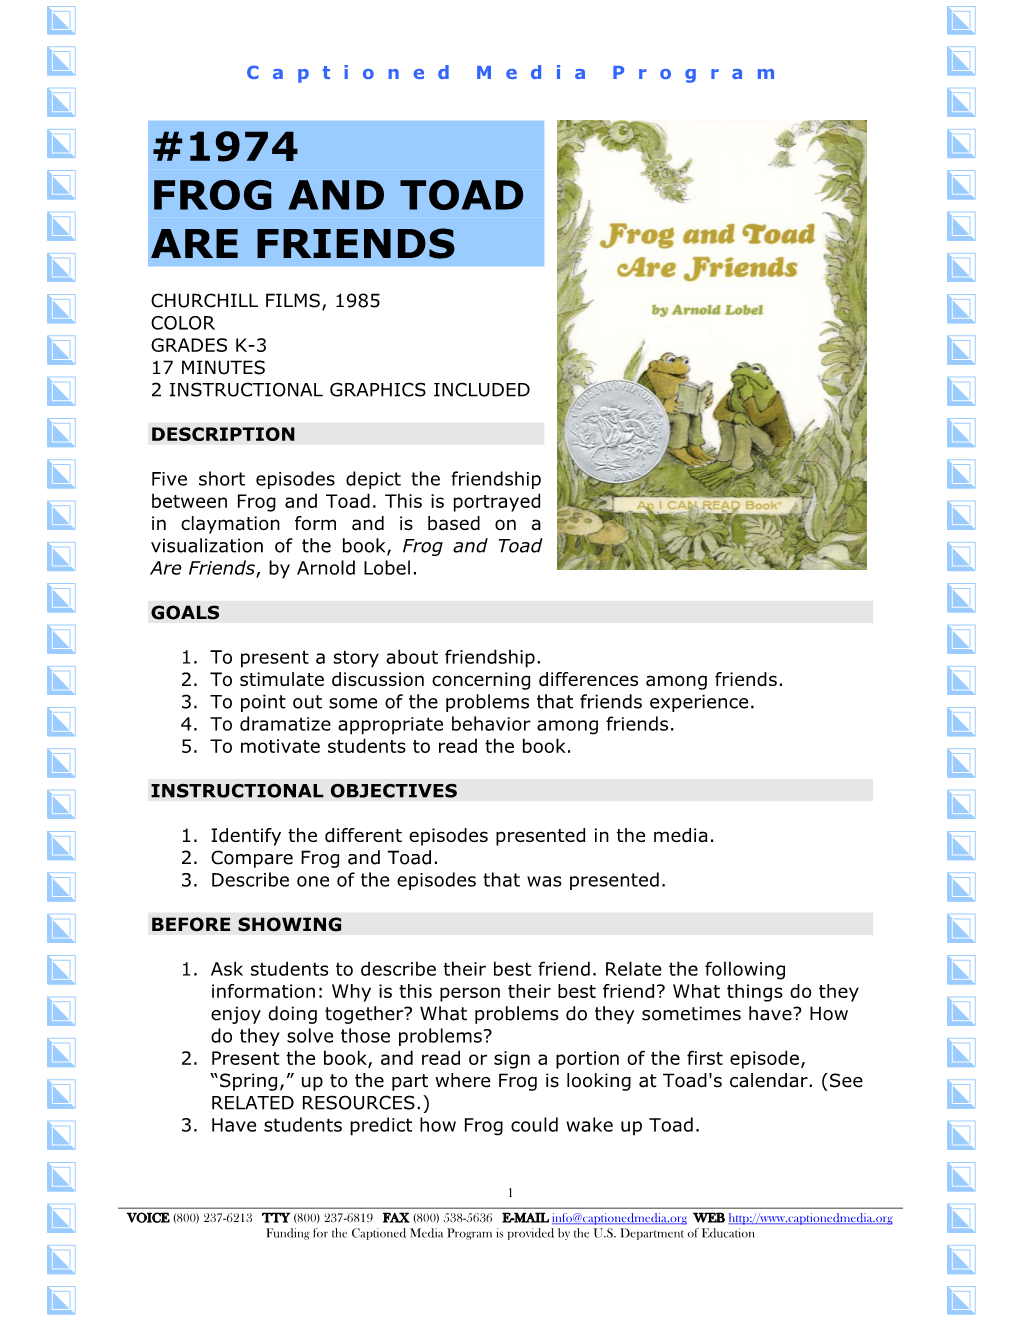 1974 Frog and Toad Are Friends